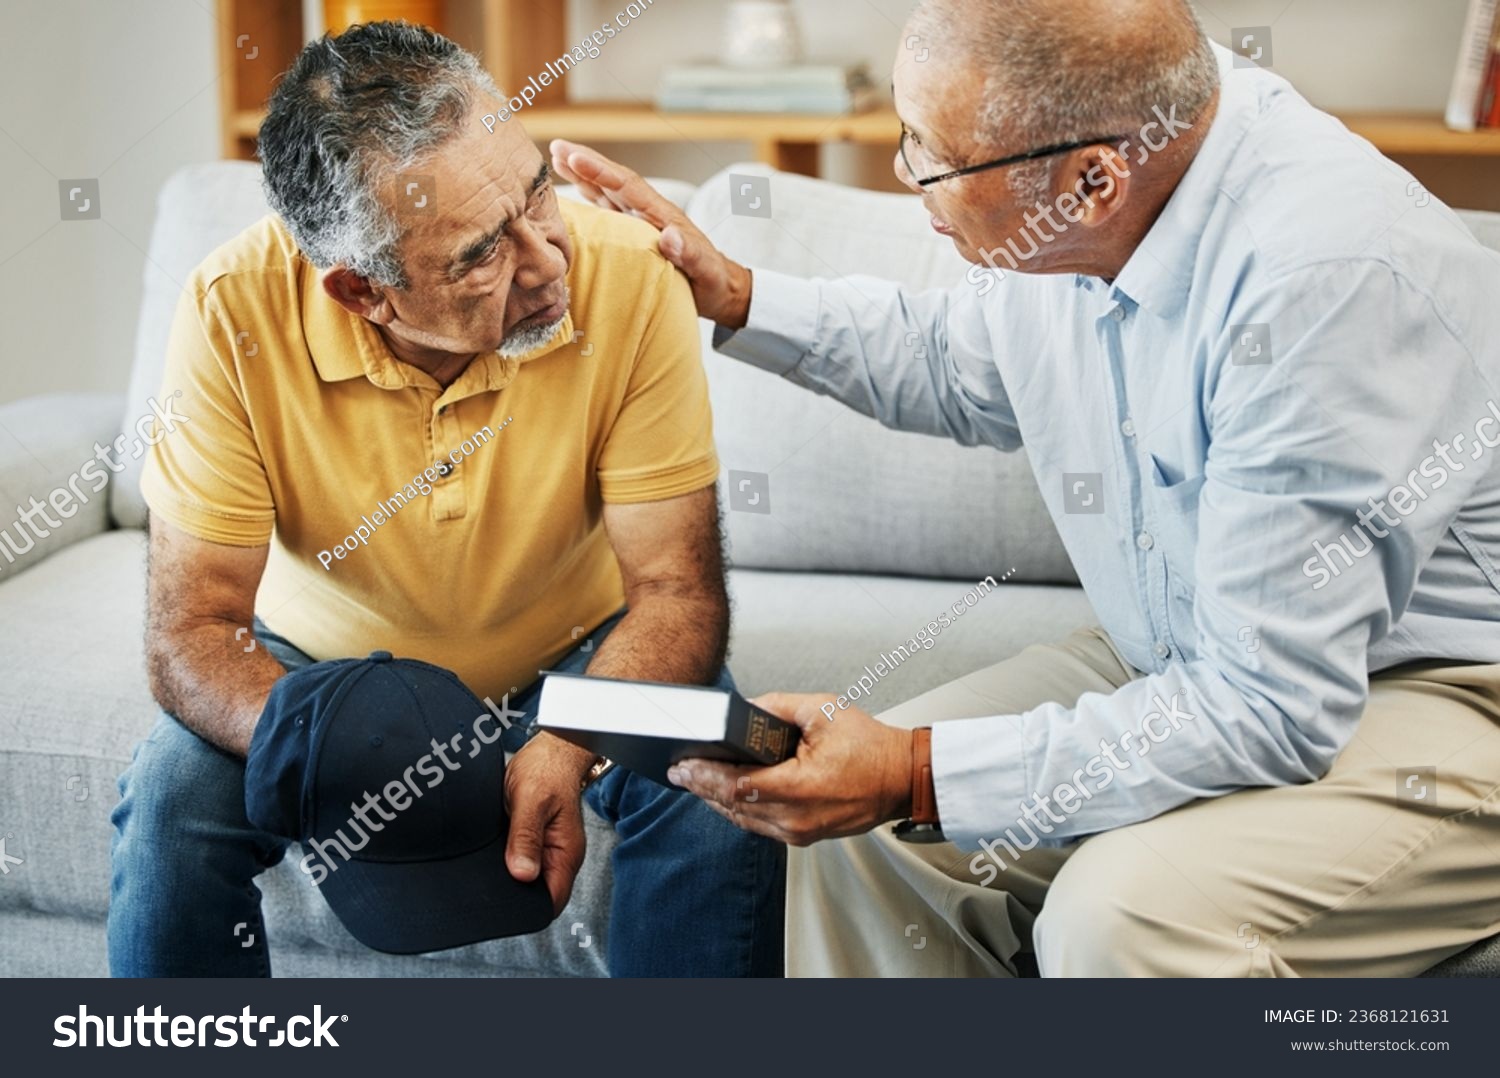 Men, home and bible with support for faith, worship and prayer by pastor, church or jesus christ. Elderly men, diversity and spiritual guidance for grief with loss and depression with hope in god #2368121631